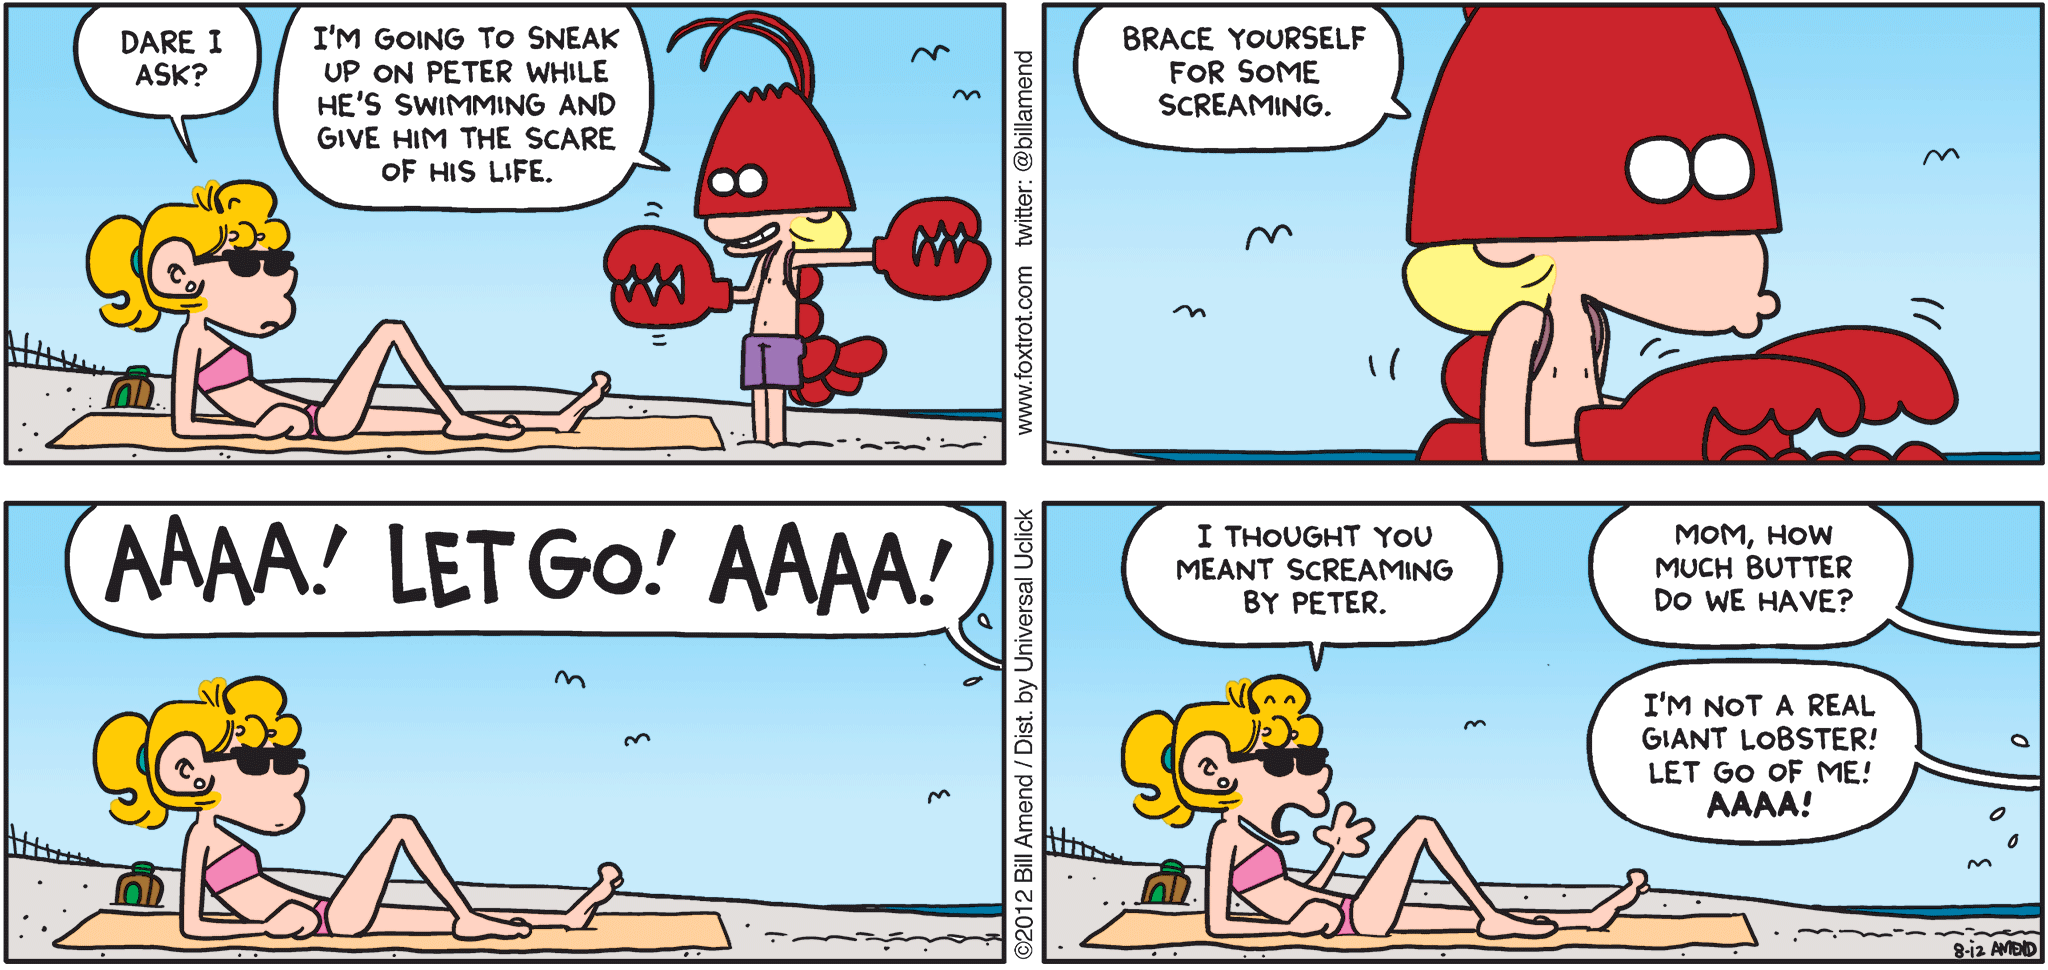 FoxTrot comic strip by Bill Amend - "Crock Lobster" published August 12, 2012 - Paige: Dare I ask? Jason: I'm going to sneak up on Peter while he's swimming and give him the scare of his life. Brace yourself for some screaming. AAAA! LET GO! AAAA! Paige: I thought you meant screaming by Peter. Peter: Mom, how much butter do we have? Jason: I'm not a real giant lobster! Let go of me! AAAA!